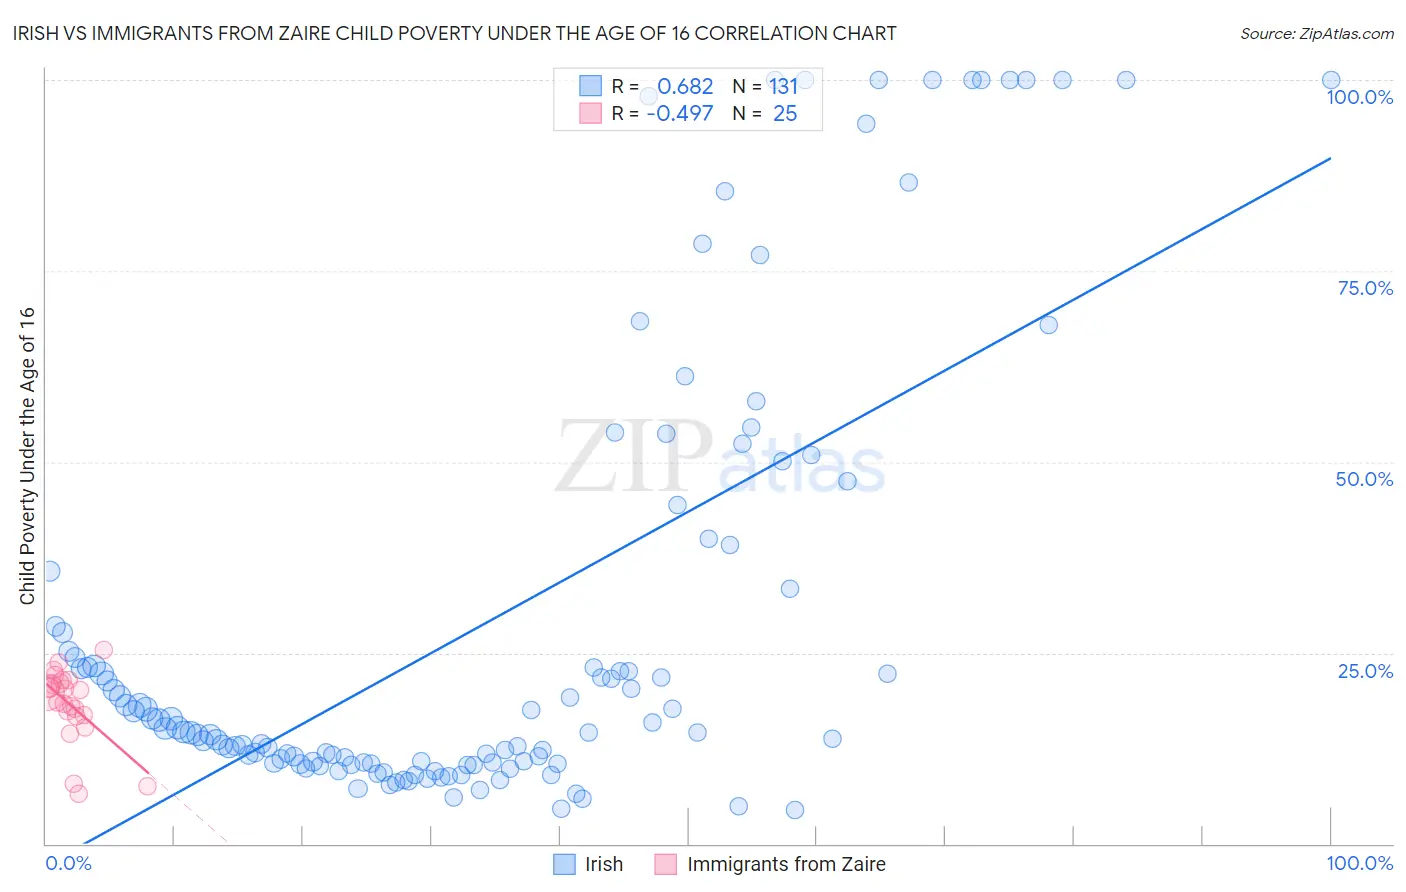 Irish vs Immigrants from Zaire Child Poverty Under the Age of 16